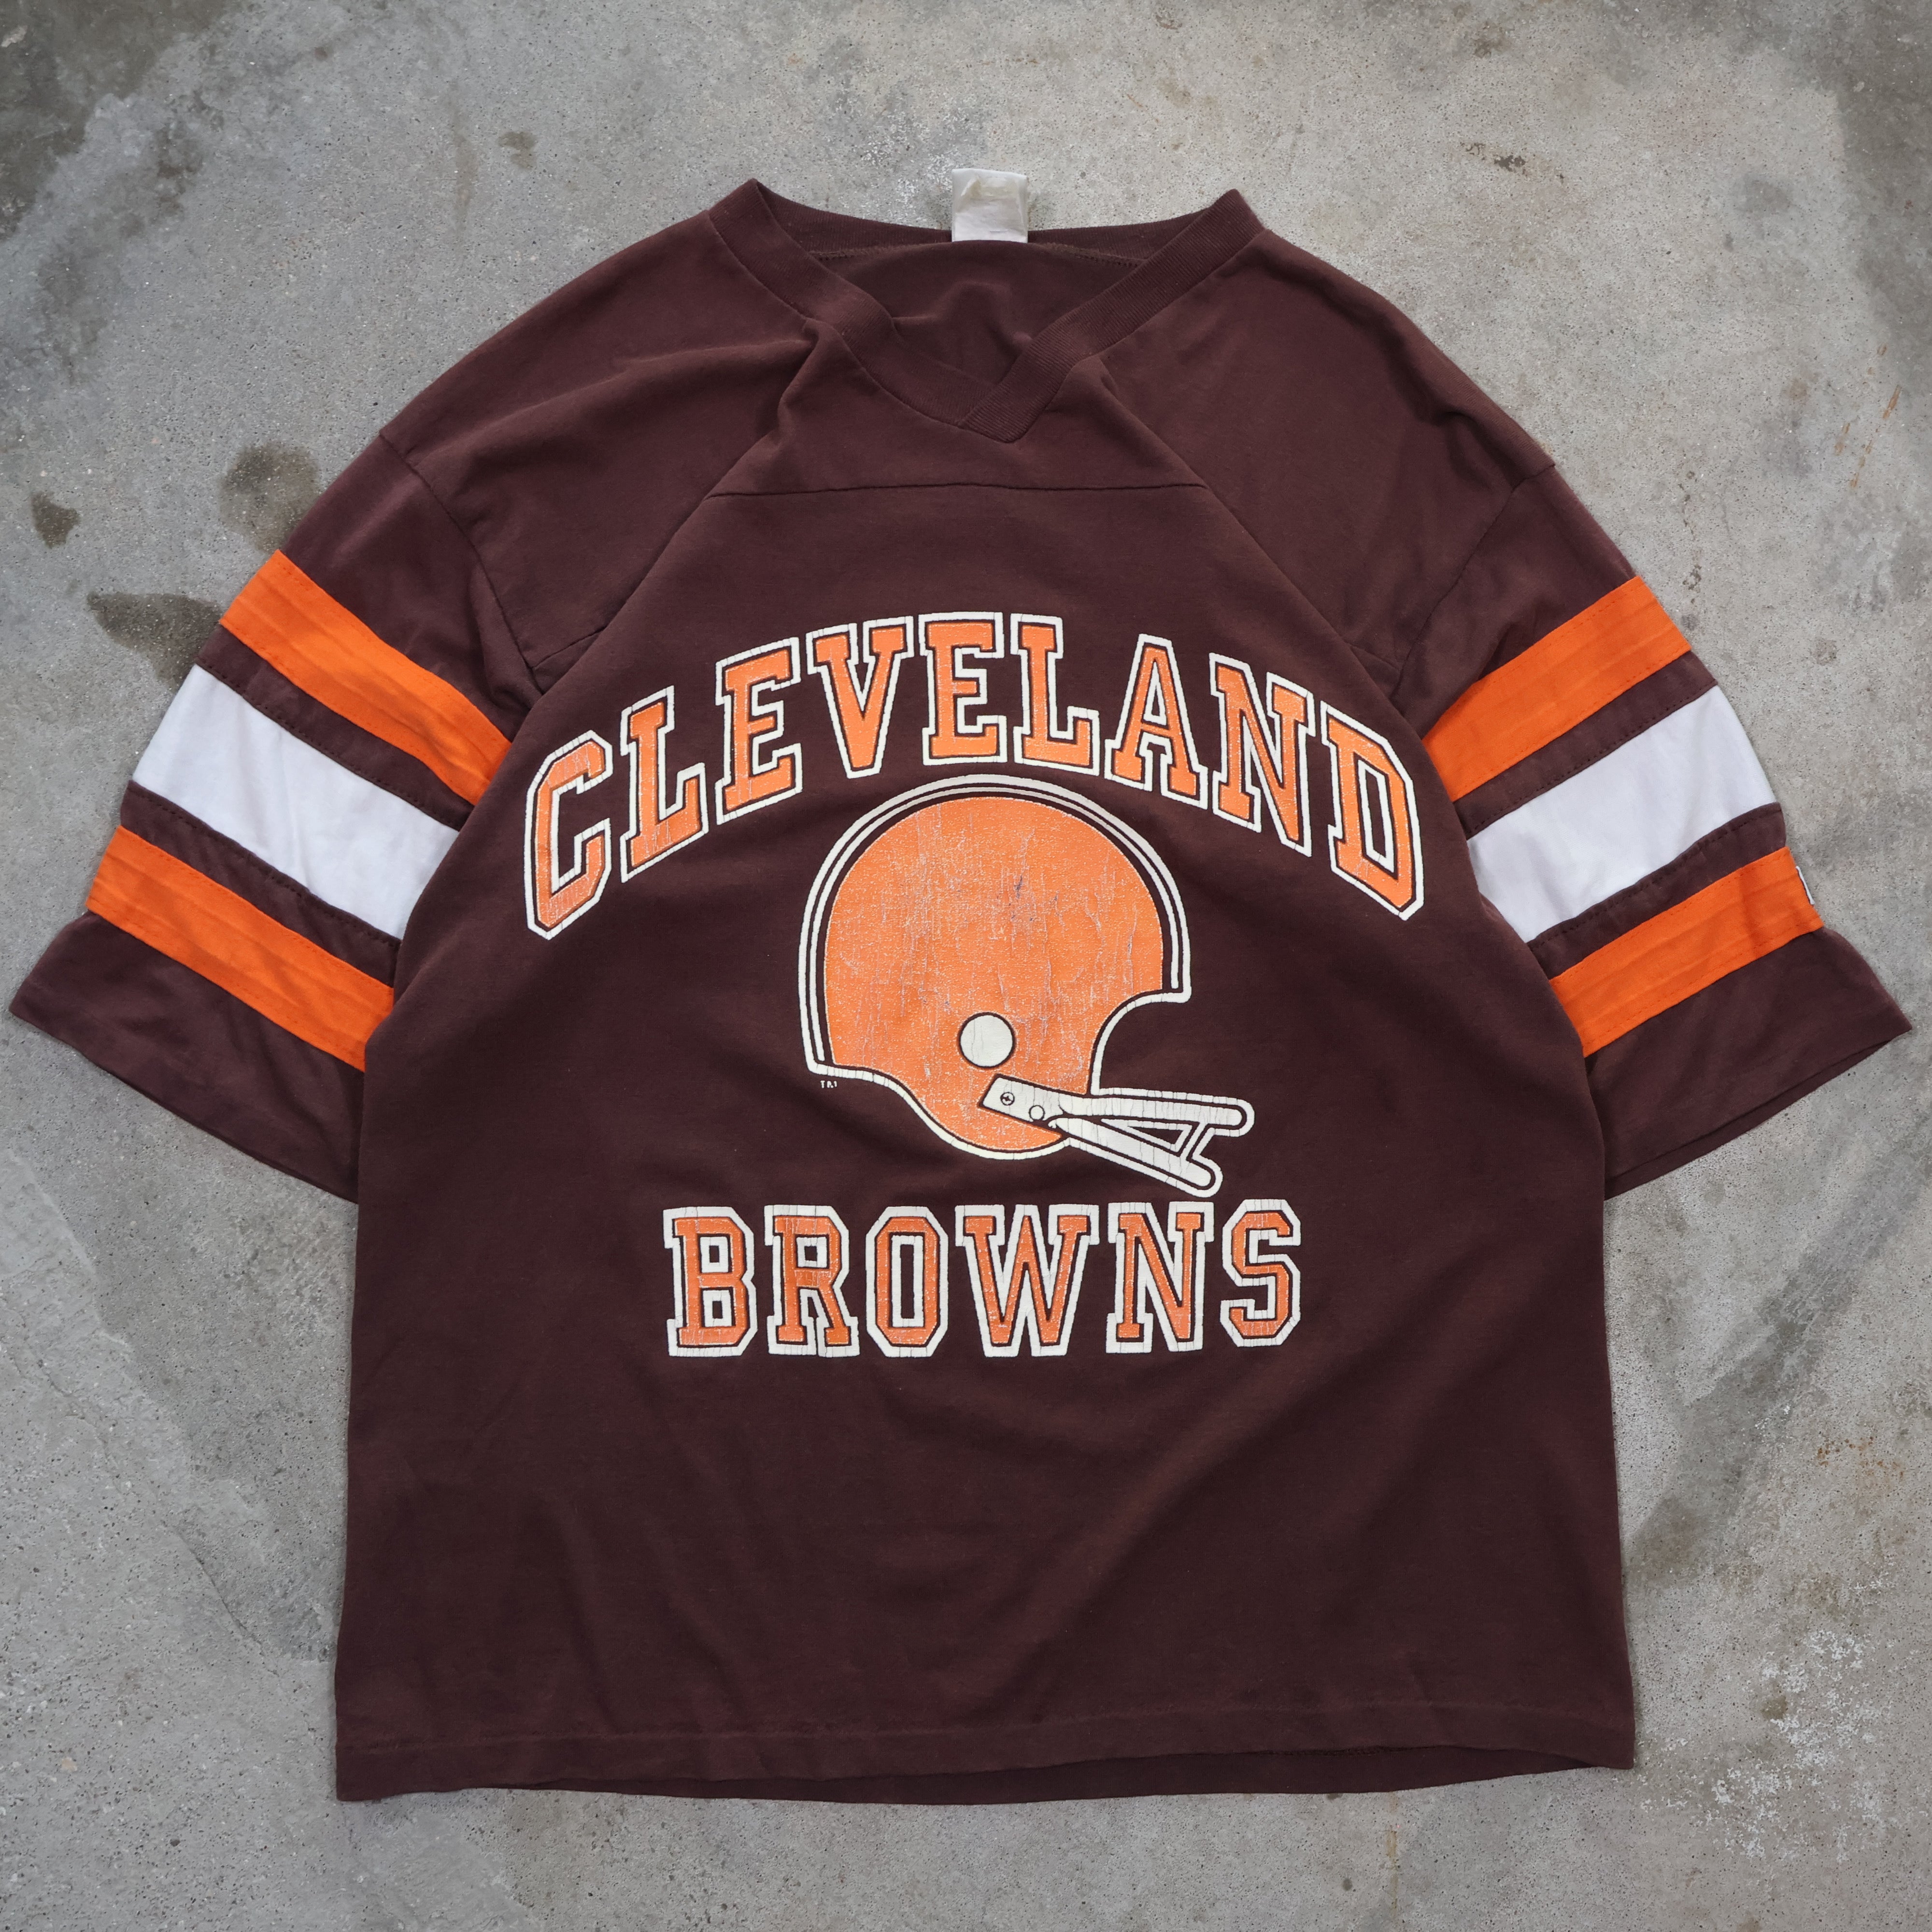 Cleveland Browns 1/2 Sleeve T-Shirt 80s (Large)